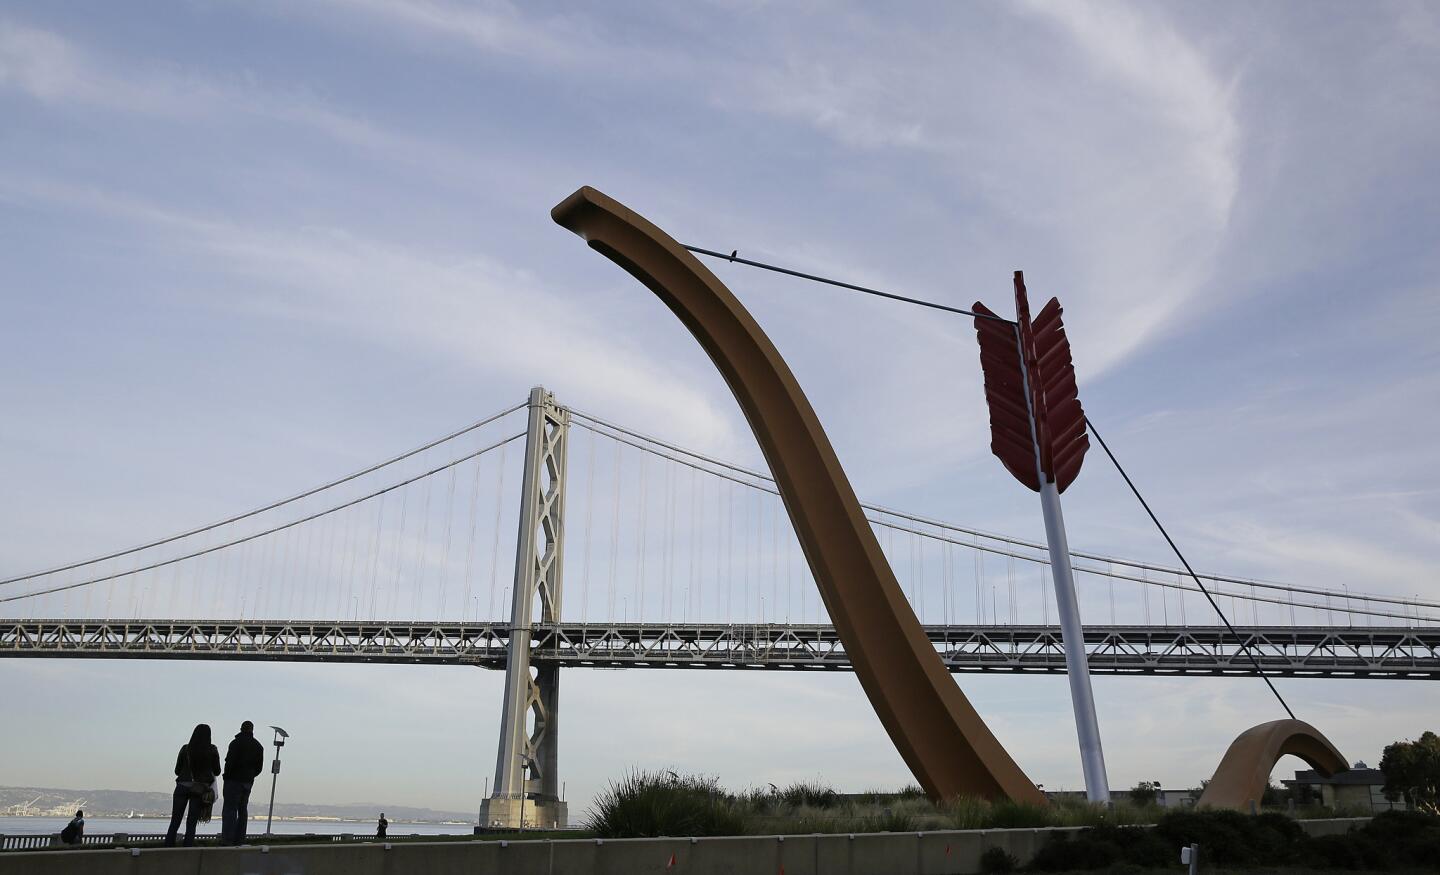 Near the San Francisco-Oakland Bay Bridge, have a picnic at Cupid's Span statue. This is the perfect spot to watch the Bay Lights Show later in the evening.